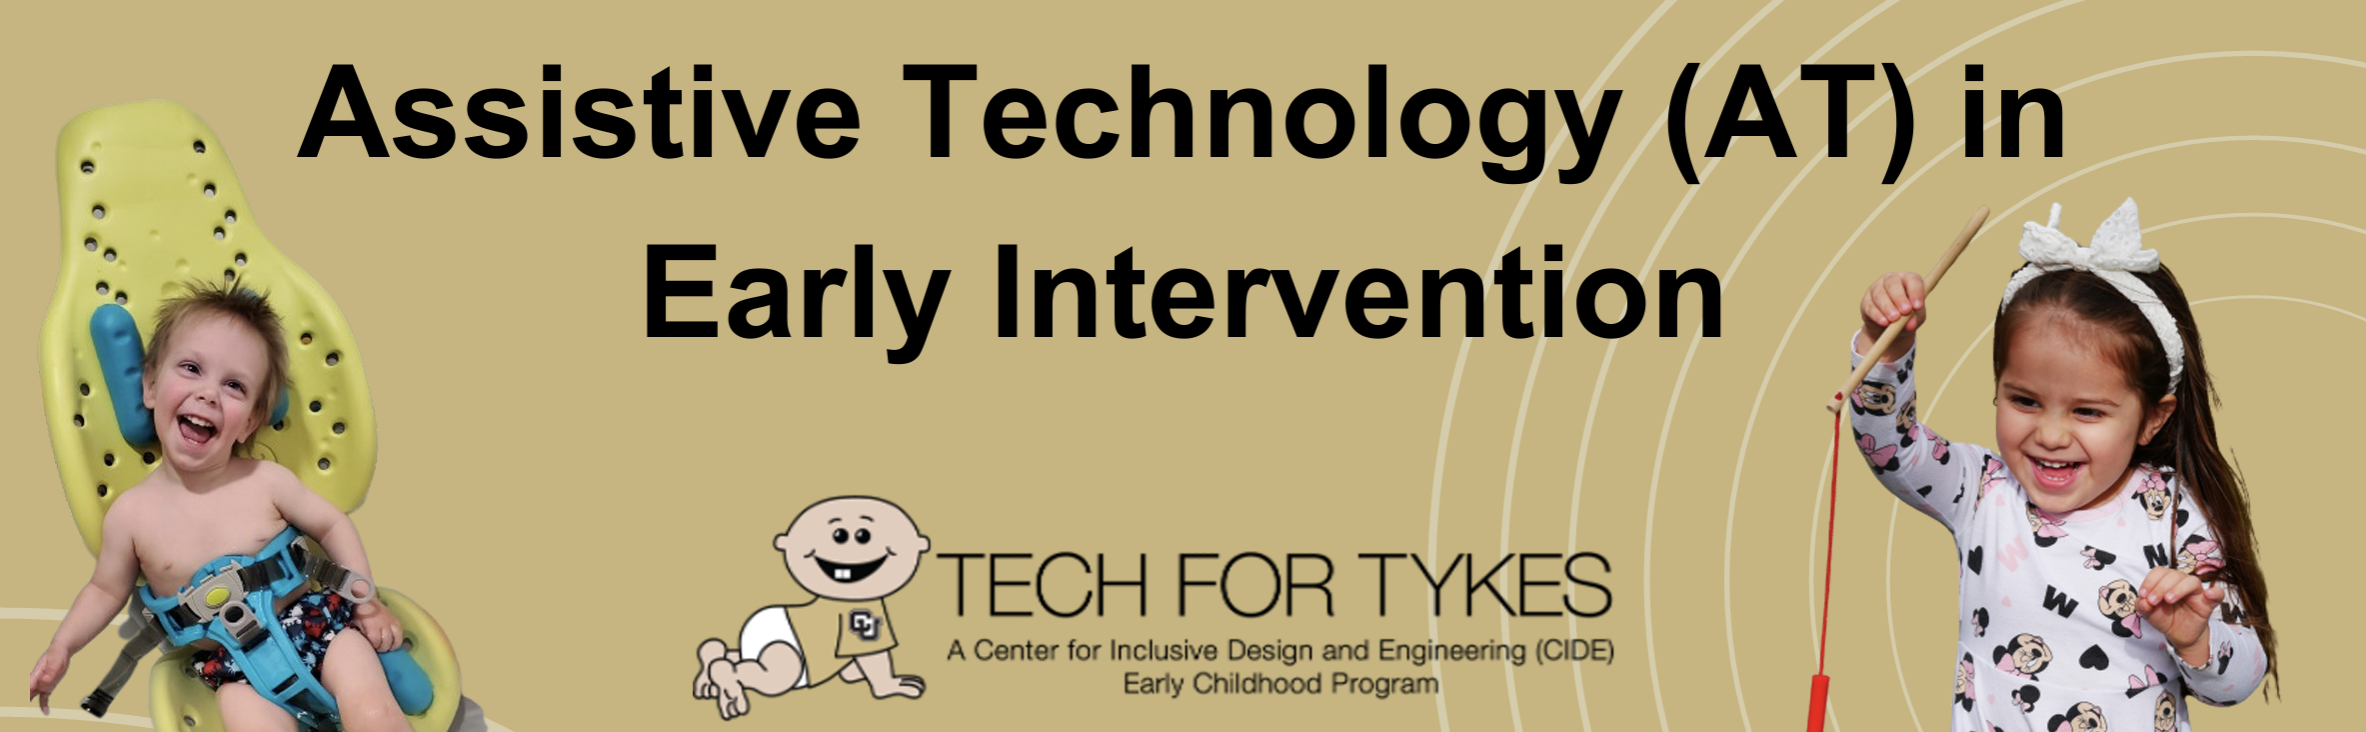 Assistive Technology in Early Intervention, Tech for Tykes